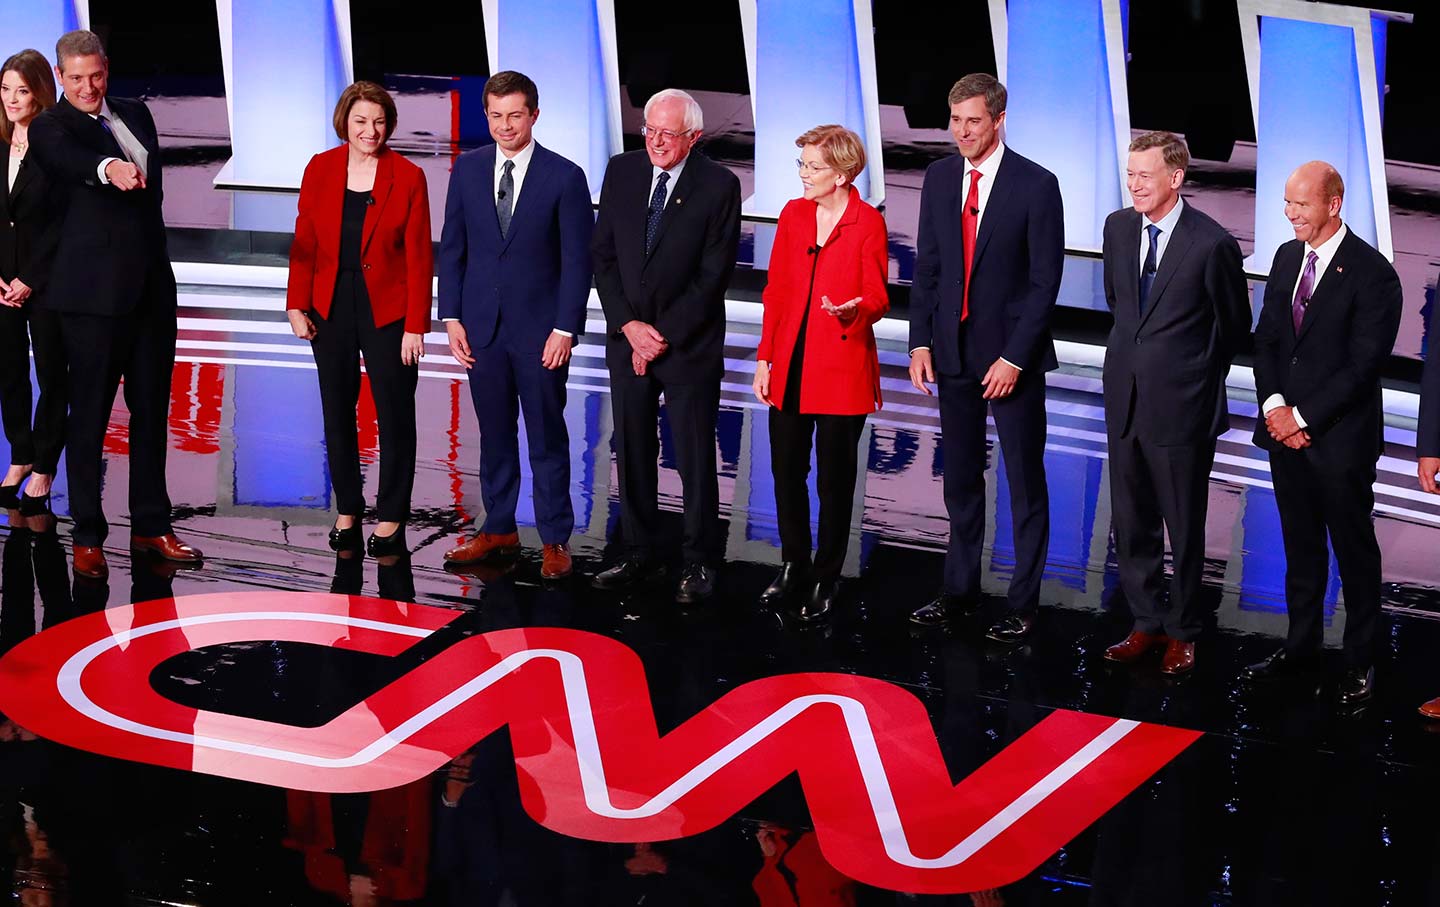 The Democratic Debates Are an Unprecedented Moment for Americans With Student Debt